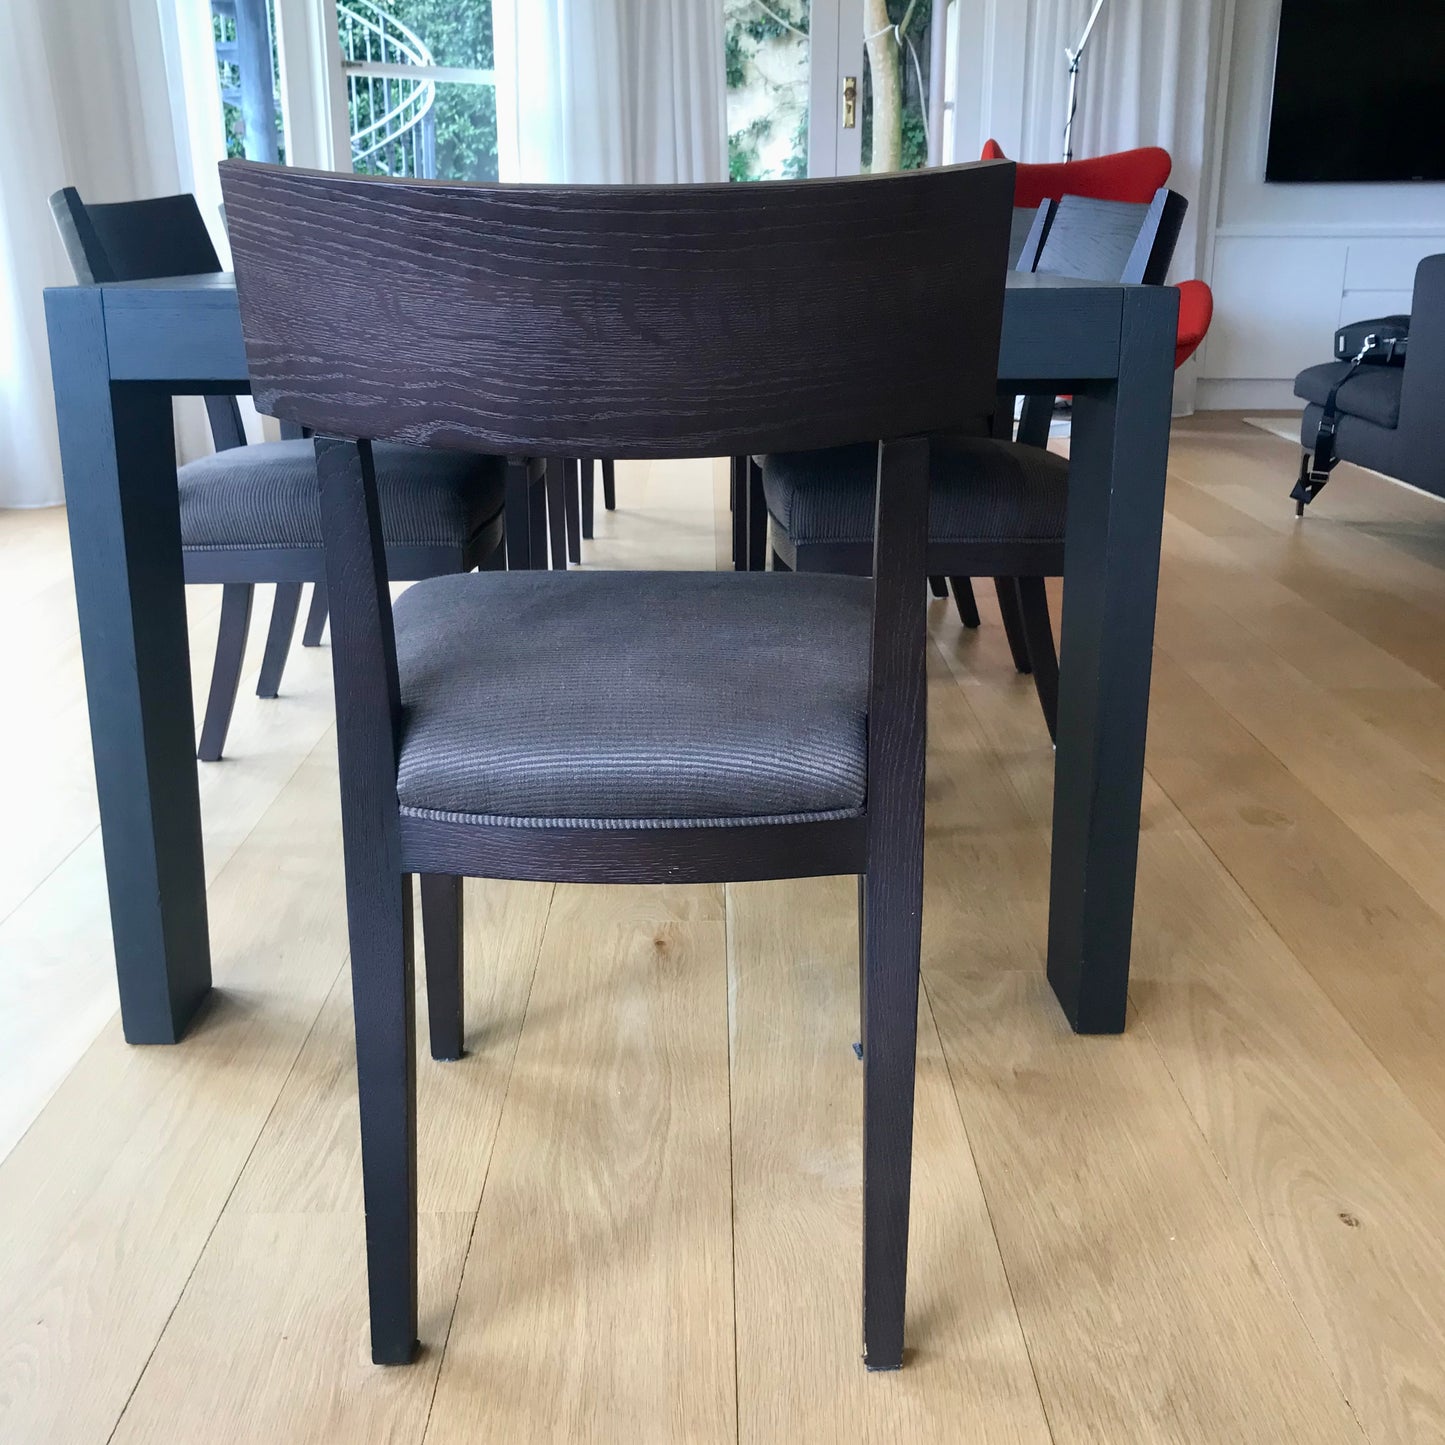 Set of FOUR Aretusa Dining Chair by Antonio Citterio for Maxalto (2 Sets Available)